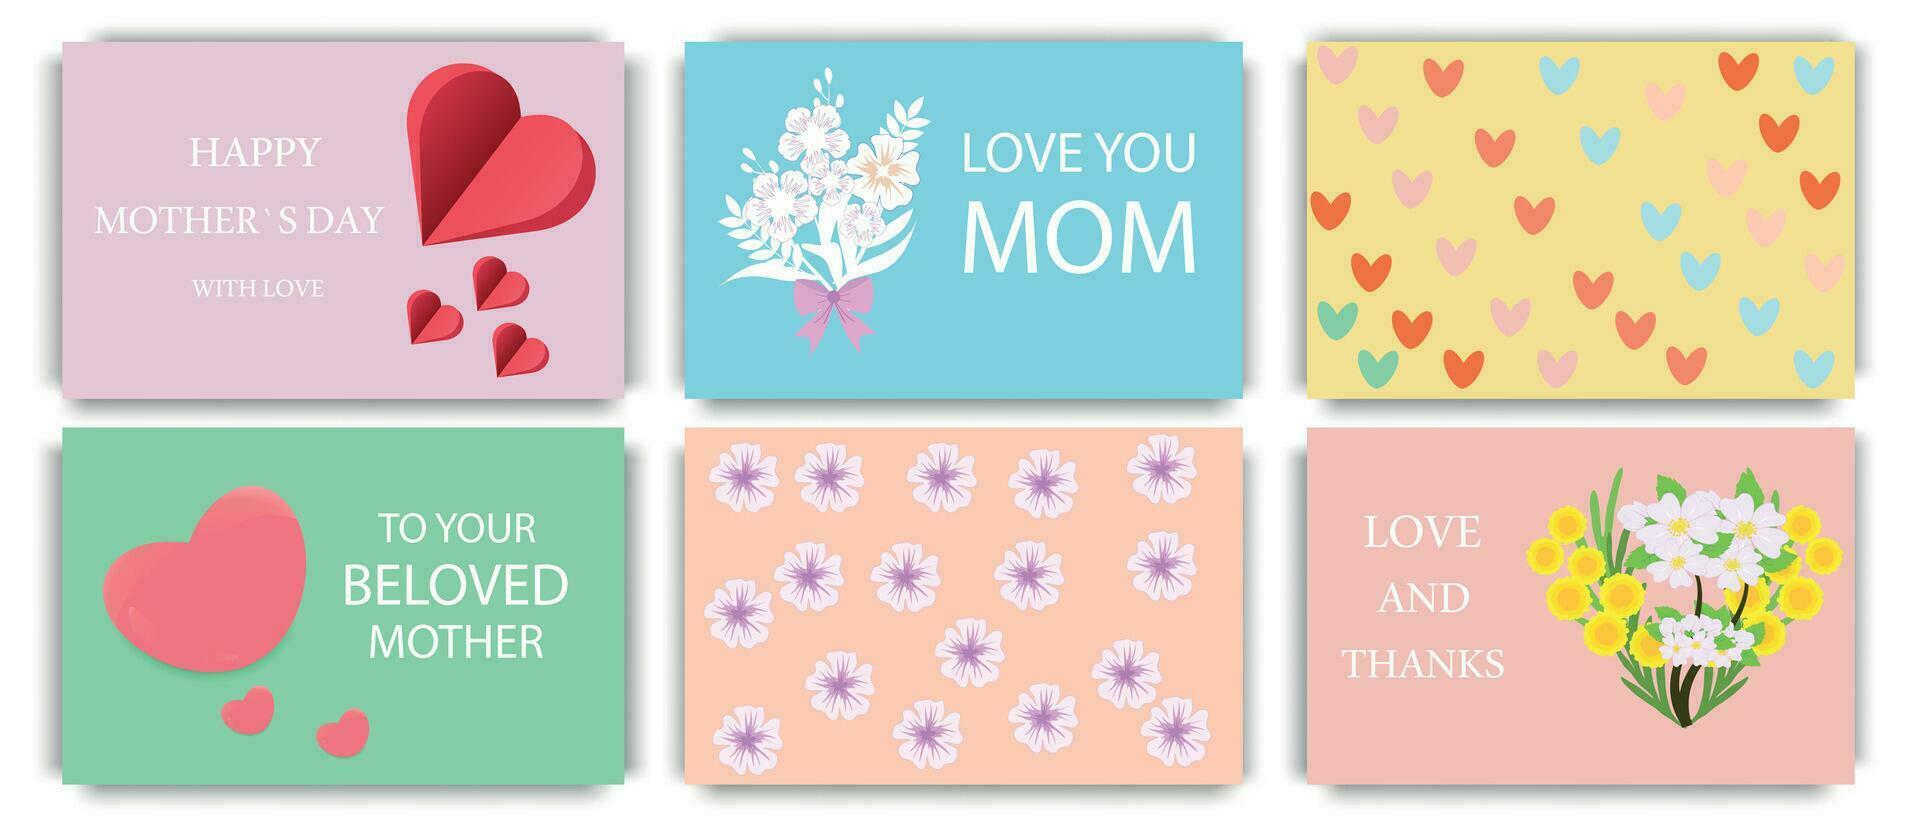 A set of Mothers Day greeting cards with bouquets of flowers and hearts on backgrounds in bed colors. Holiday concept. Vector illustration.